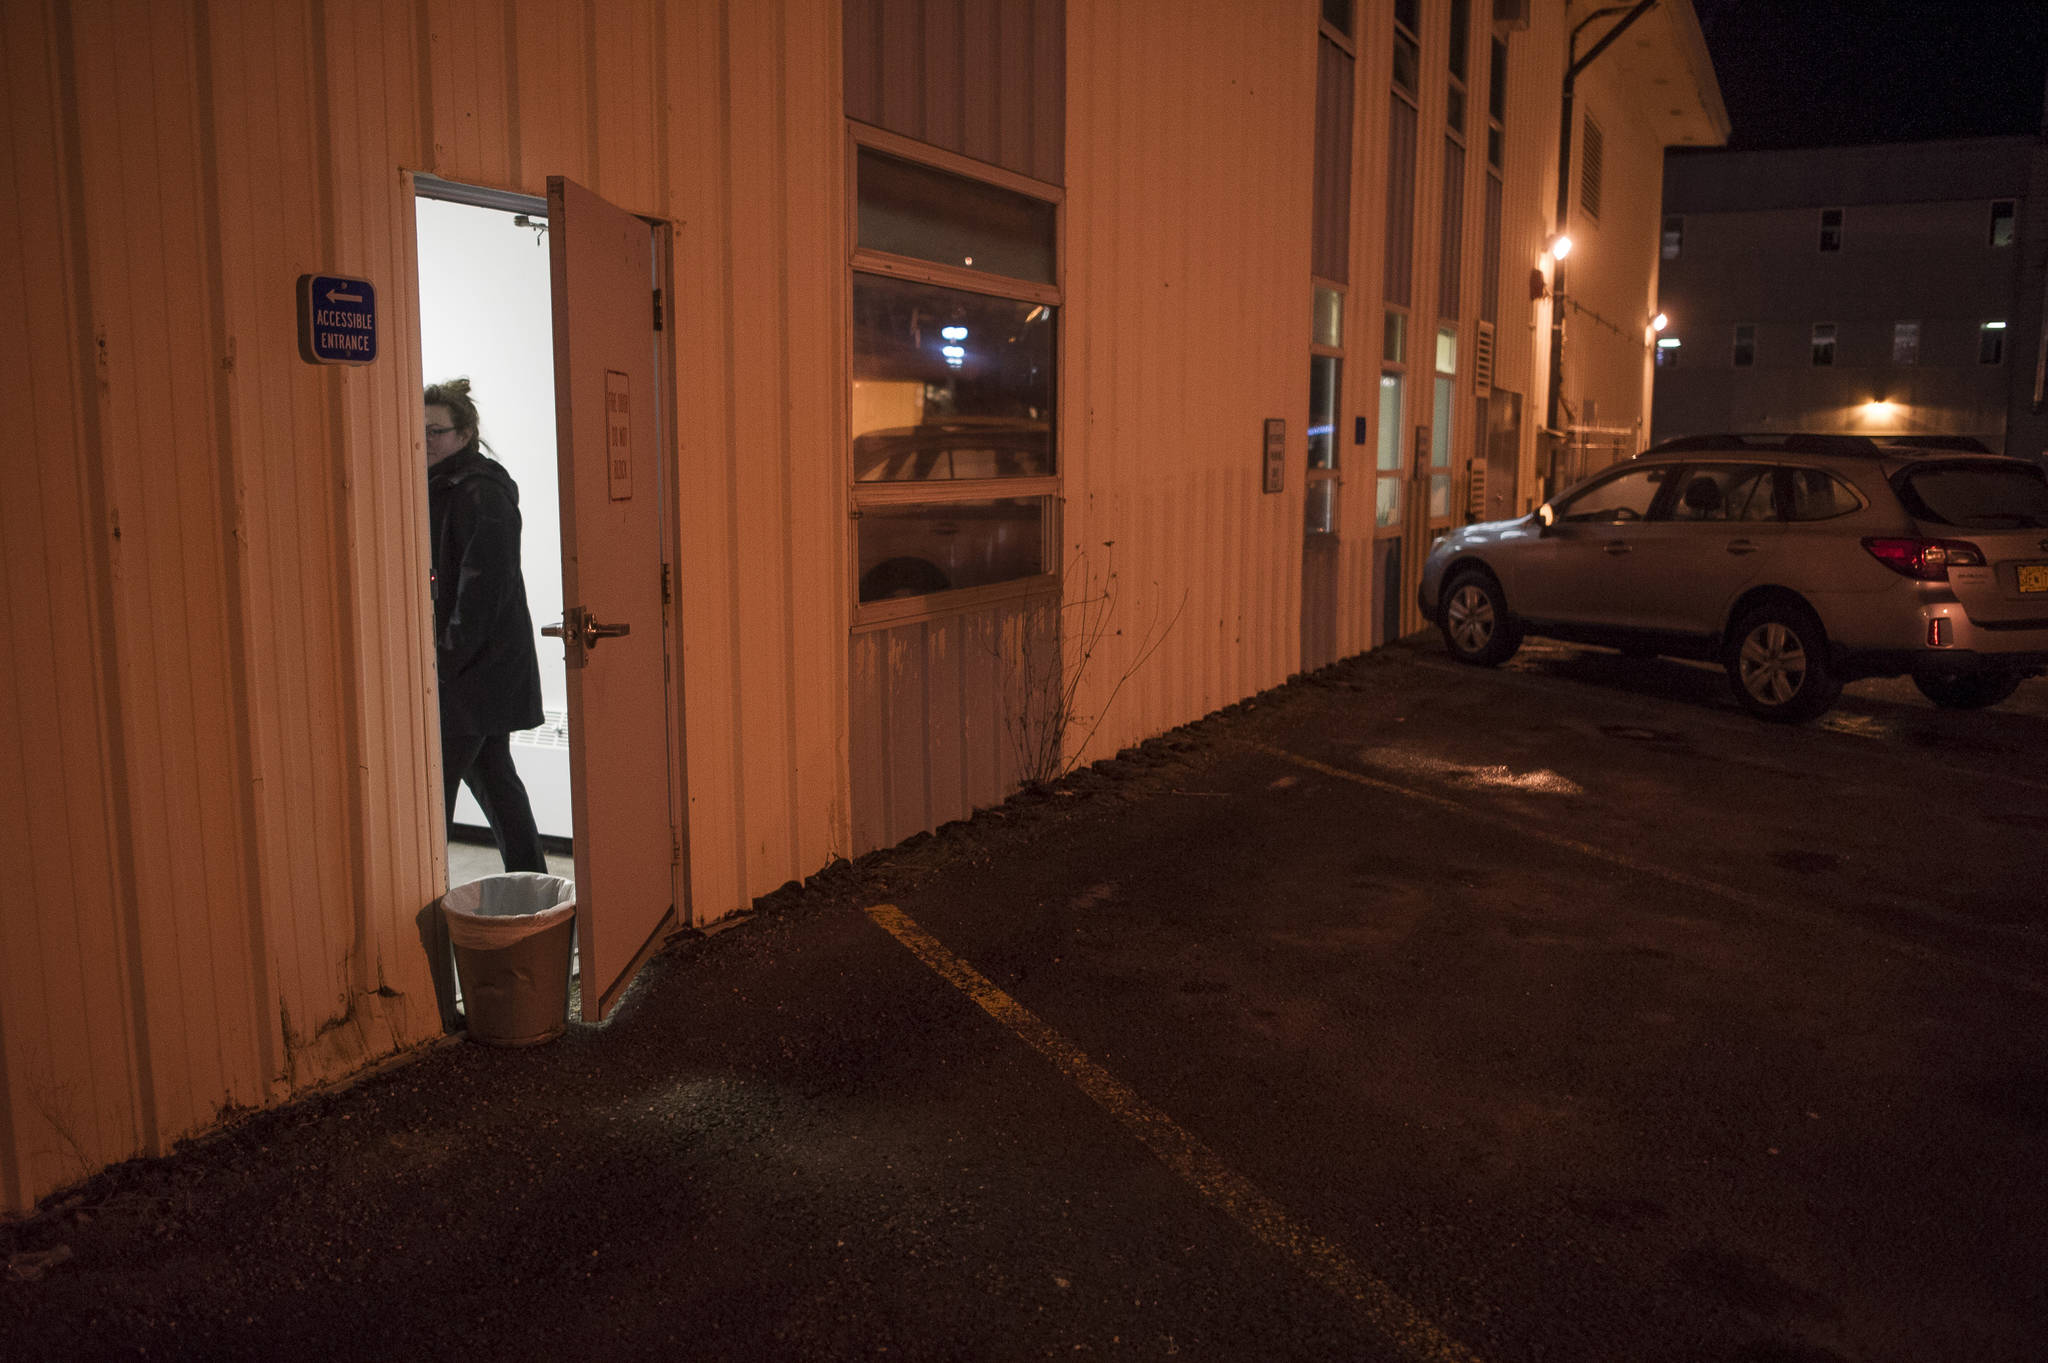 Mandy Cole, chairwoman of the Juneau Coalition on Housing and Homelessness, waits for homeless people at a new warming shelter in the old Public Safety Building on Whittier Street on Friday, Dec. 1, 2017. (Michael Penn | Juneau Empire)